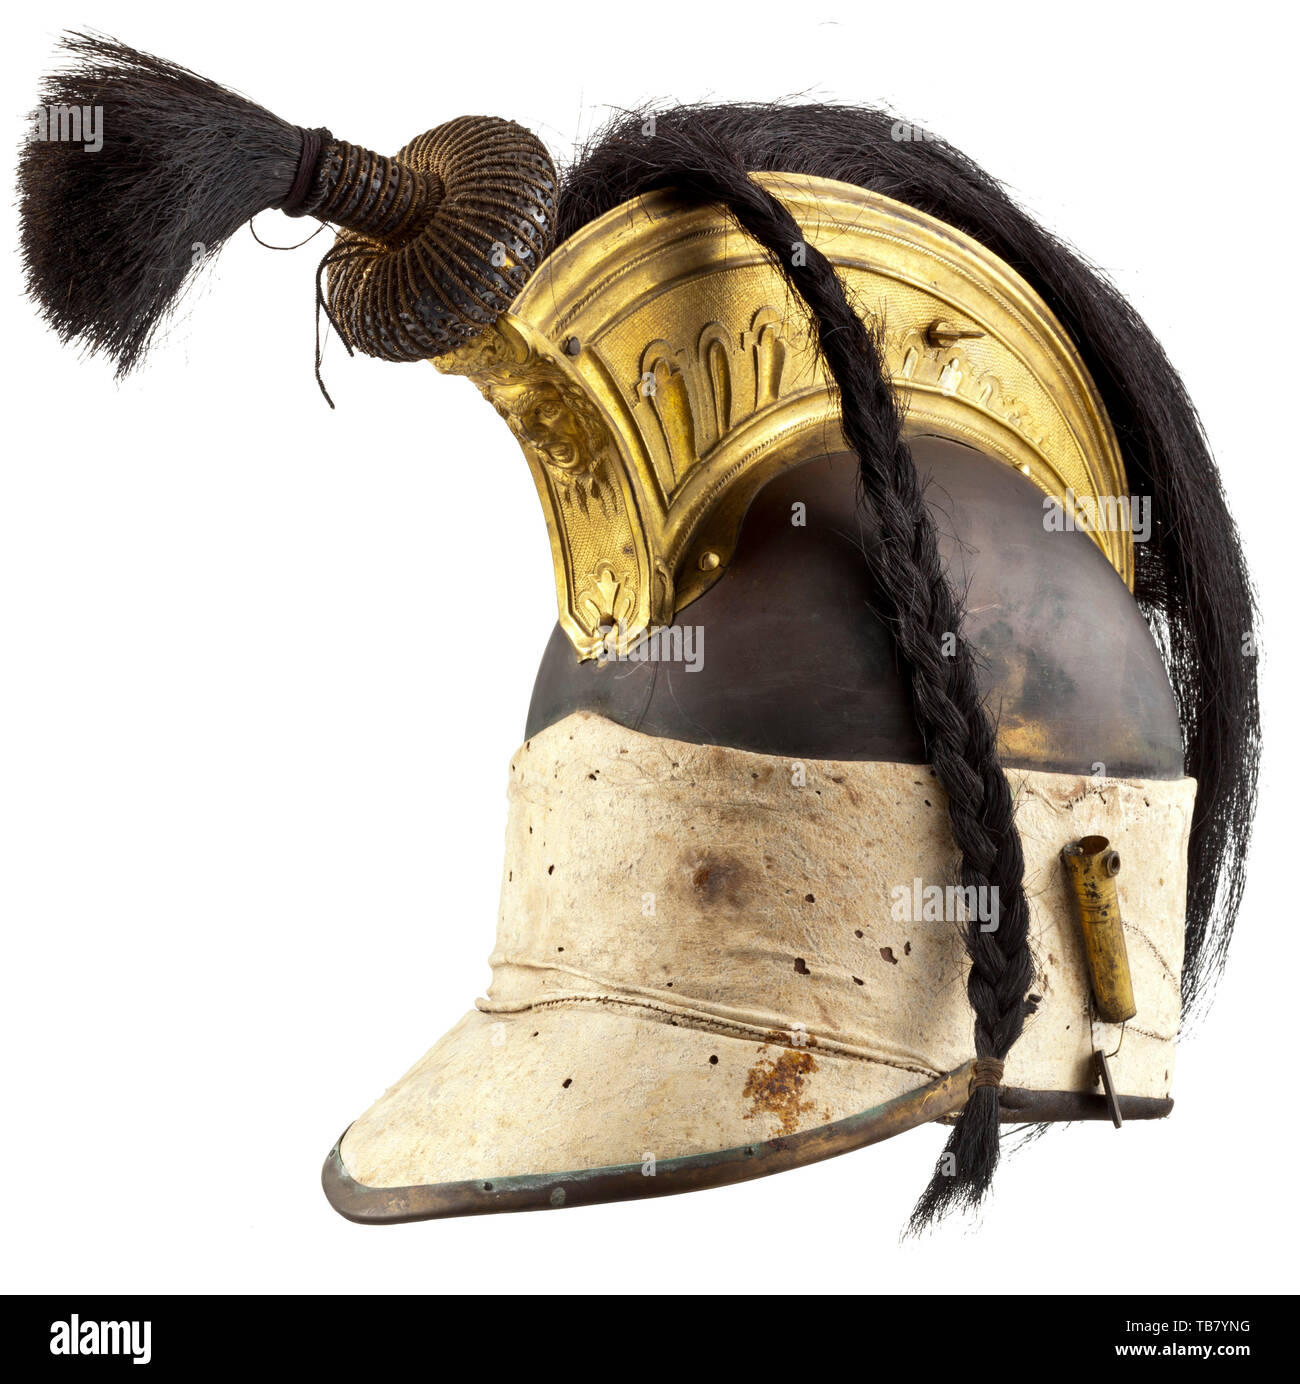 A very rare French 1st Empire Dragoon officer's helmet from the Hanoverian Royal Collection, circa 1810 - 1815, With copper skull retaining its original animal skin turban also extended to cover the leather peak (the original leopard fur now missing), fitted with gilt-brass crest decorated with Neo-classical ornament cast in low relief and including a Gorgon mask at the front, retaining much of its original black horsehair crest and frontal plume, the latter on its original base ornamented with patterned gilt wire and sequins, fitted with gilt-br, Additional-Rights-Clearance-Info-Not-Available Stock Photo